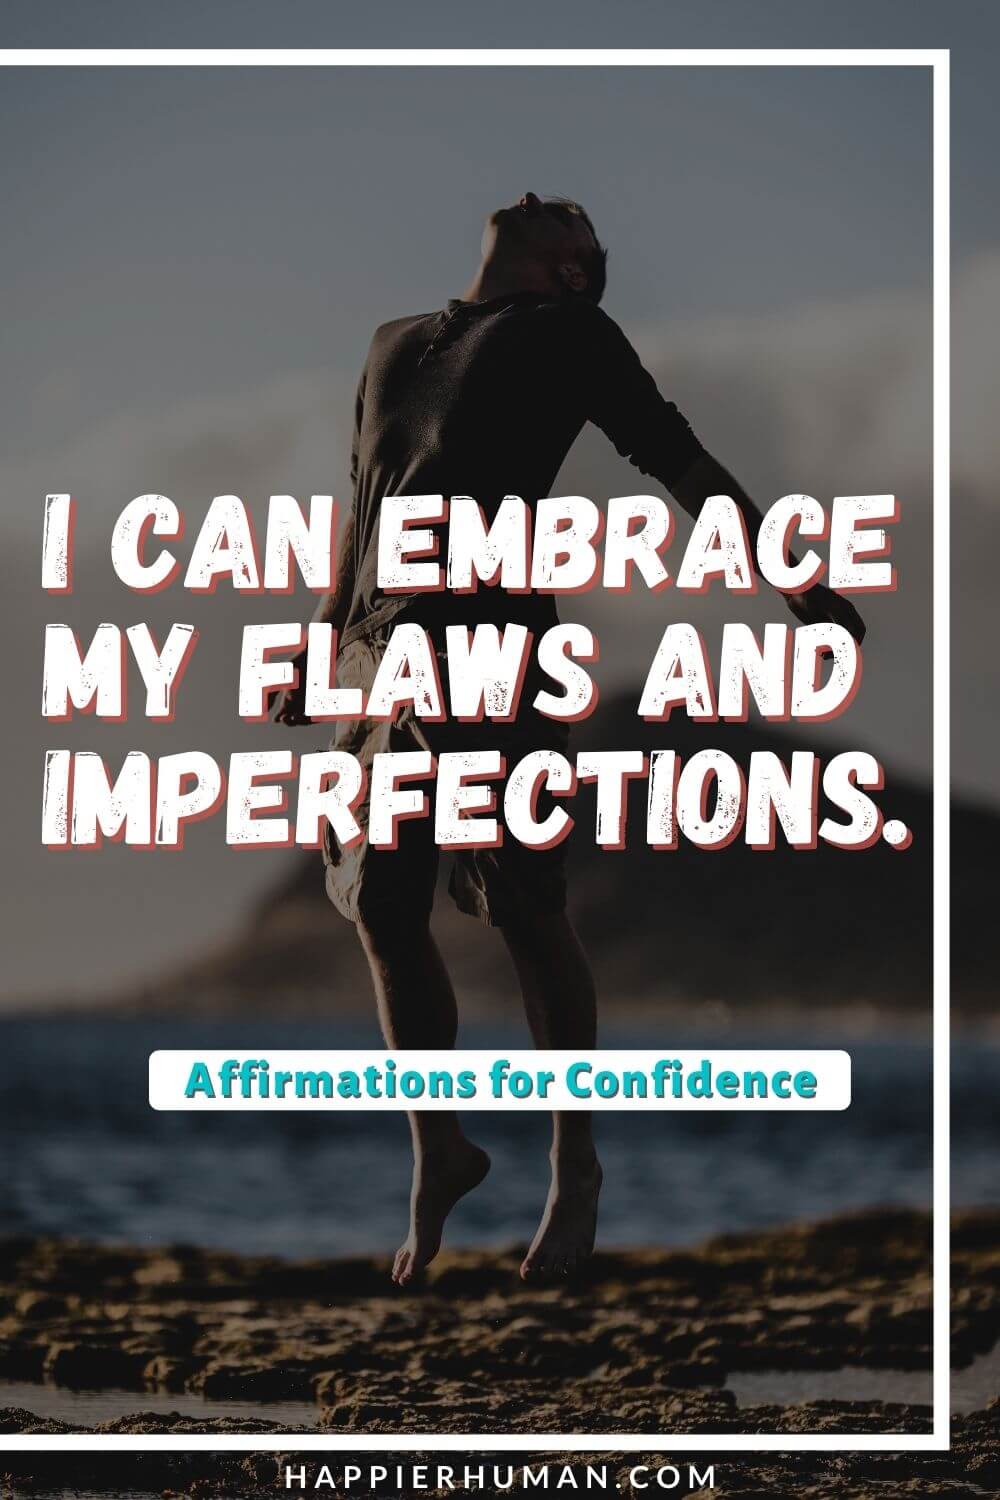 Affirmations for Confidence - I can embrace my flaws and imperfections. | affirmations for confidence and success | self esteem affirmations pdf | bedtime affirmations for confidence #affirmation #selflove #personaldevelopment